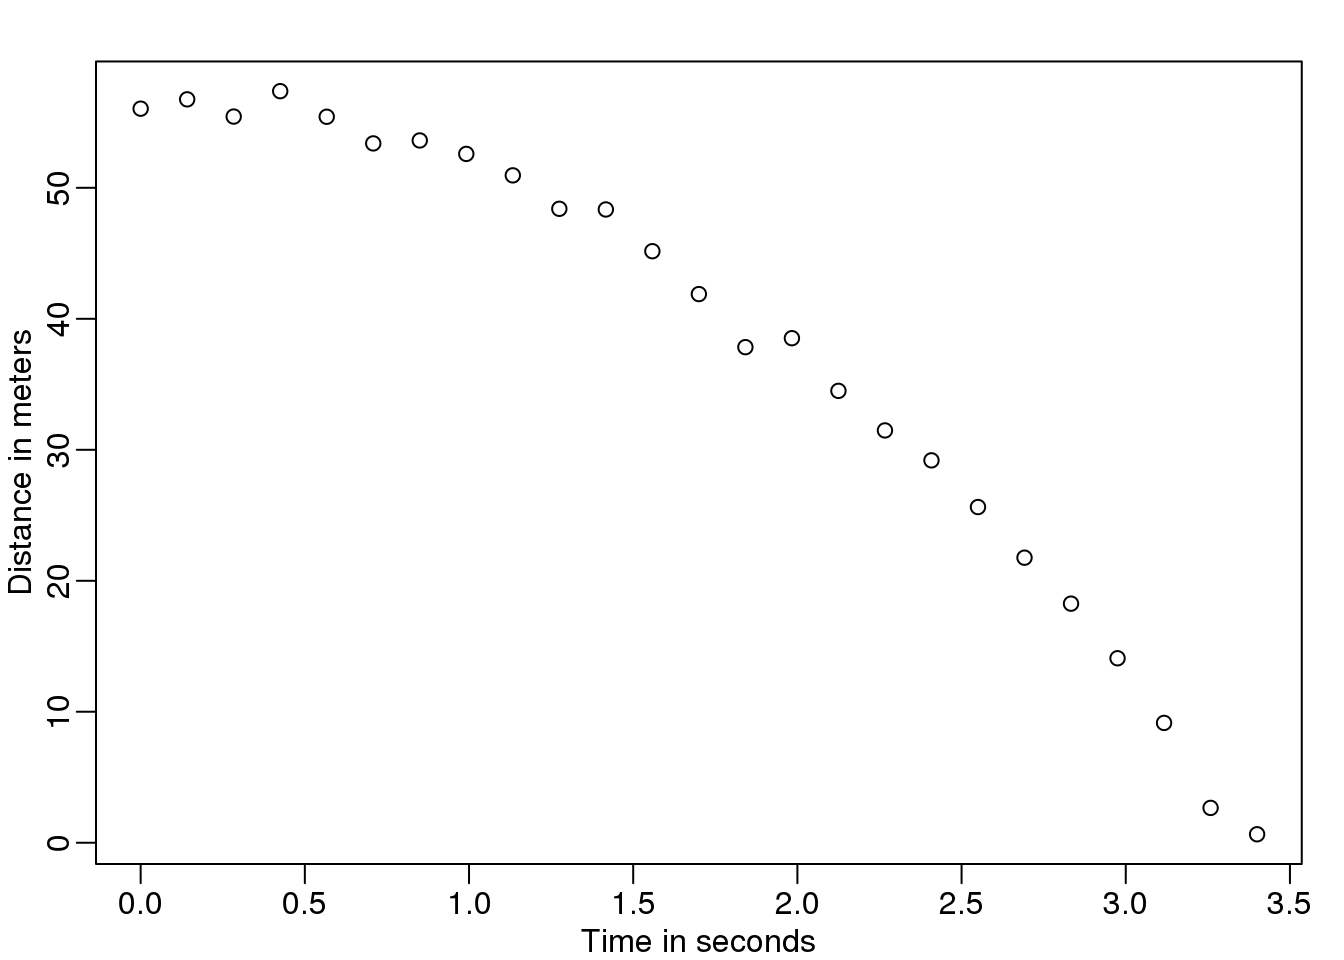 Simulated data for distance travelled versus time of falling object measured with error.